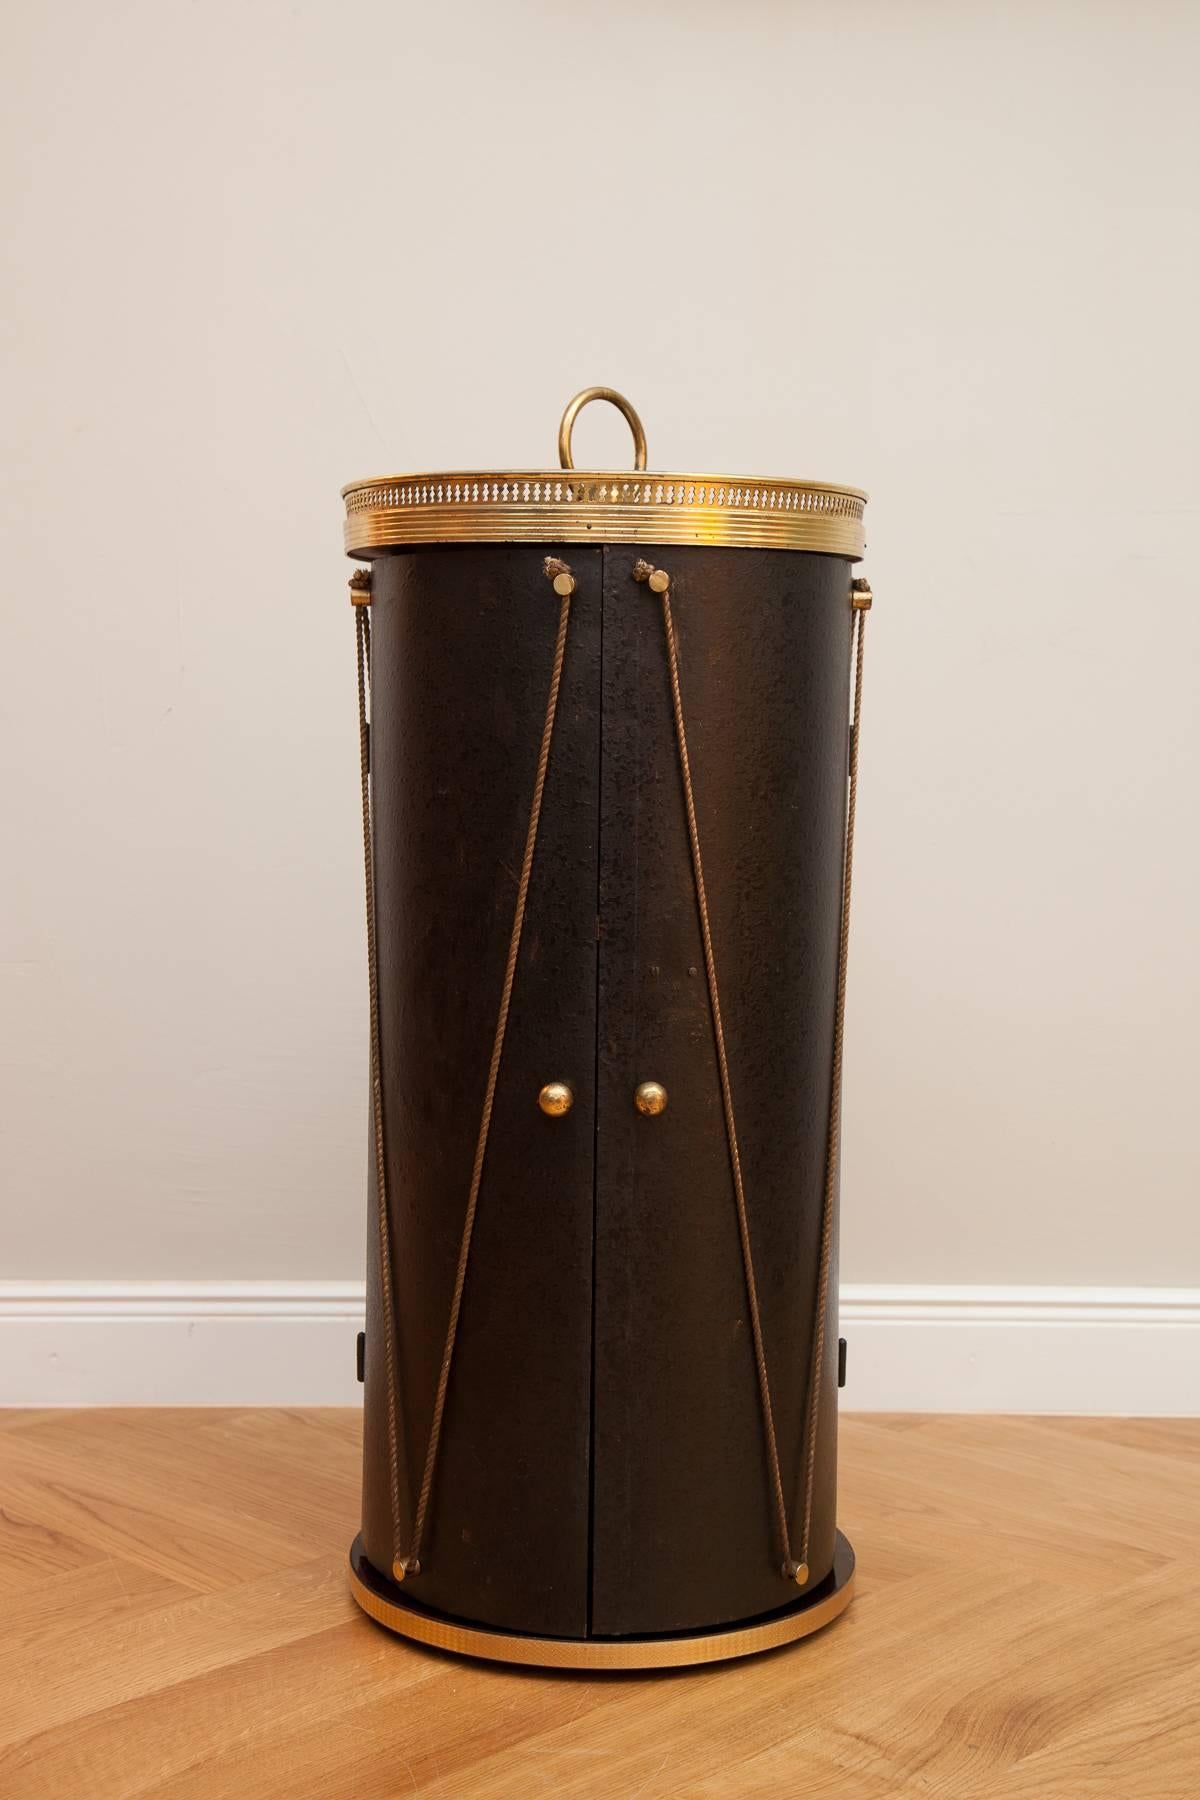 Small bar in form of a drum, Italy circa 1960, two doors, black lacquered metal, gild cords, punched out brass frame, rosewood veneer, brass handle. 
Measures: Height 78 cm, diameter 32 cm.
Perfect condition.